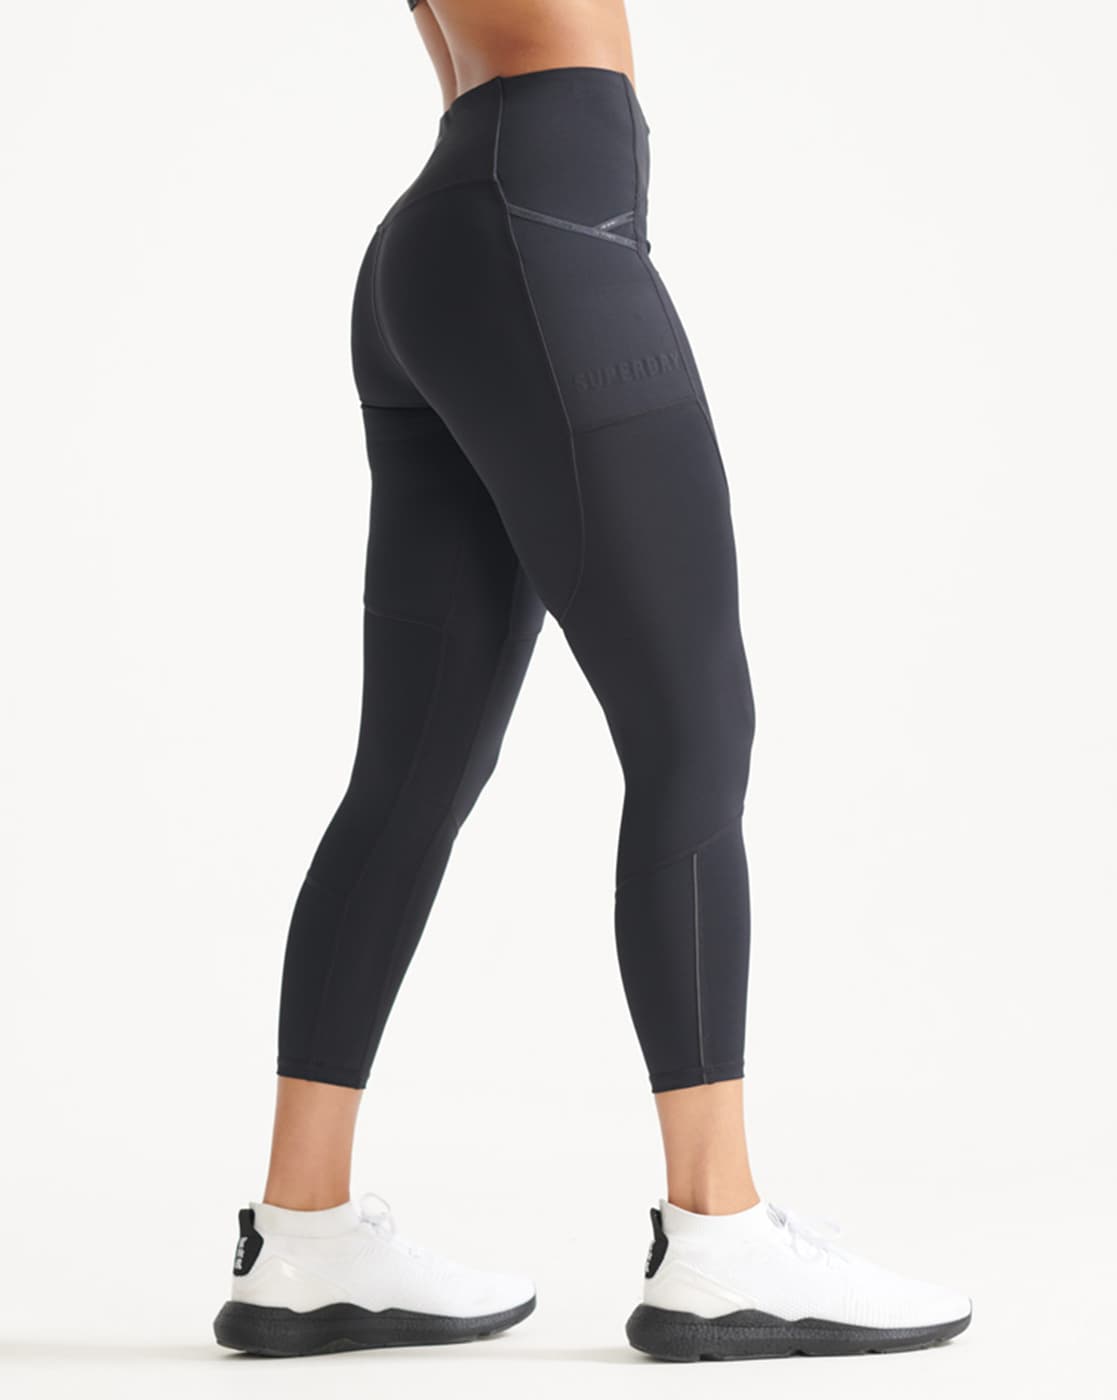 On Women's Performance Tights 7/8 in Black, Size: Large